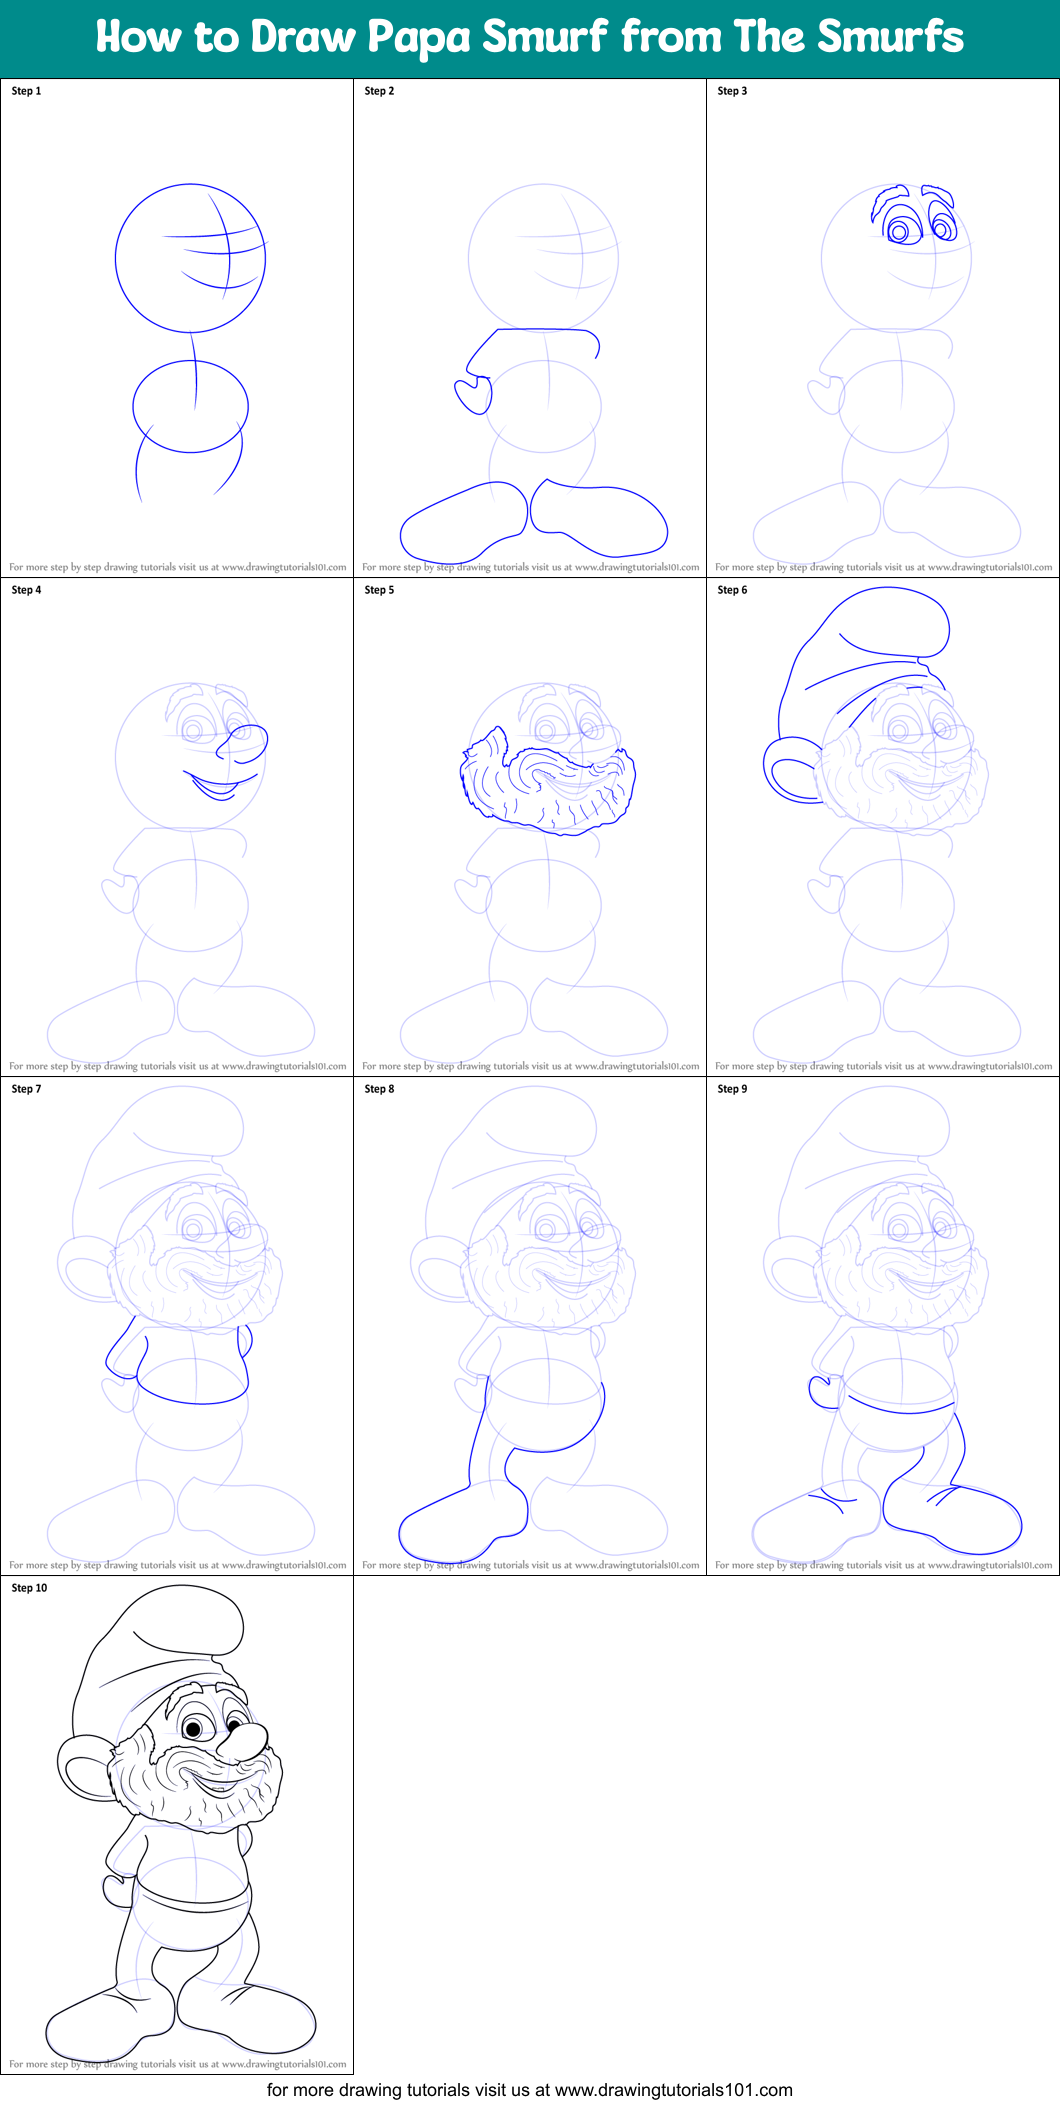 How to Draw Papa Smurf from The Smurfs printable step by step drawing